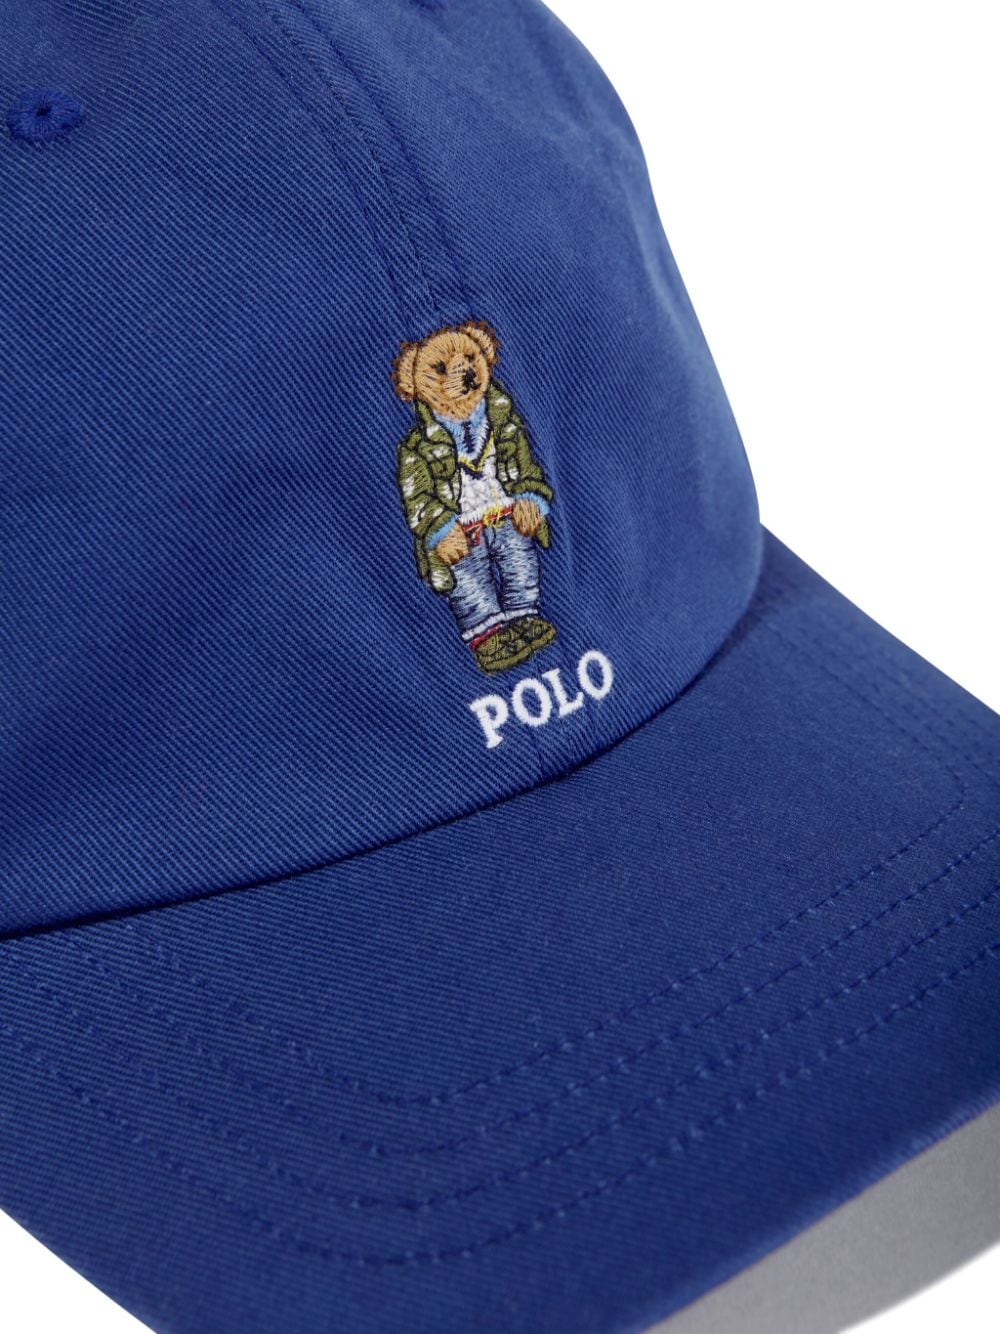 Blue baby hat with logo